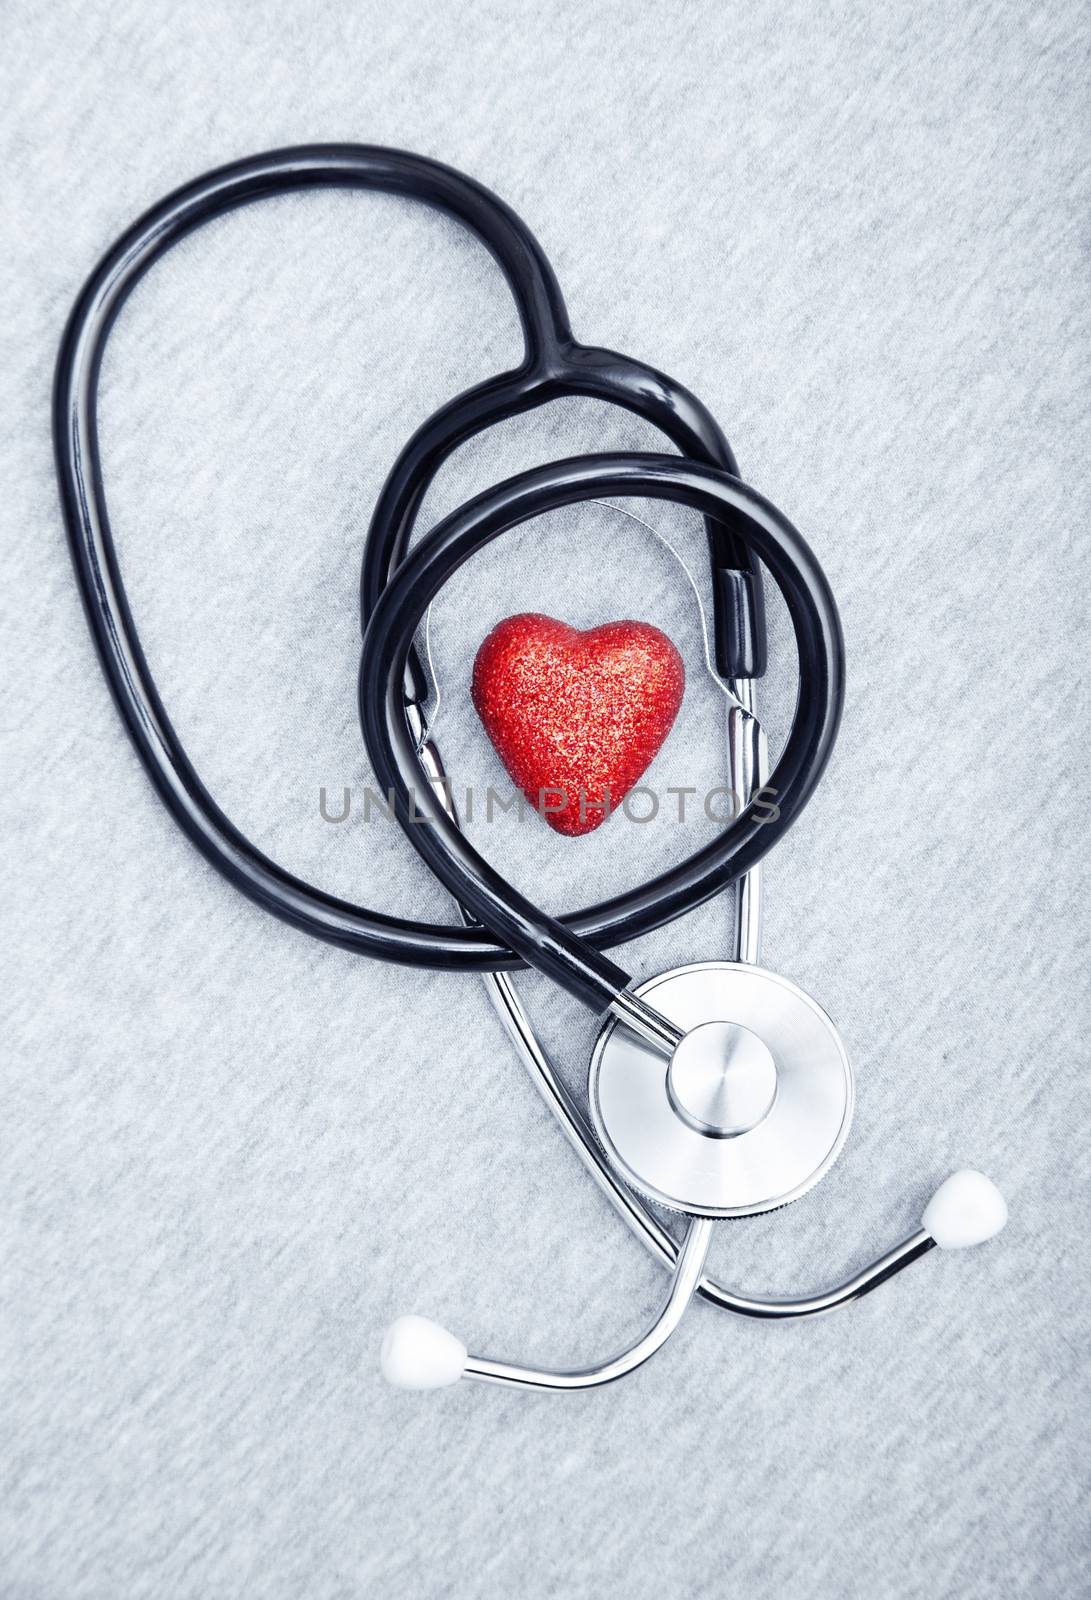 Medical stethoscope and heart on a textured background